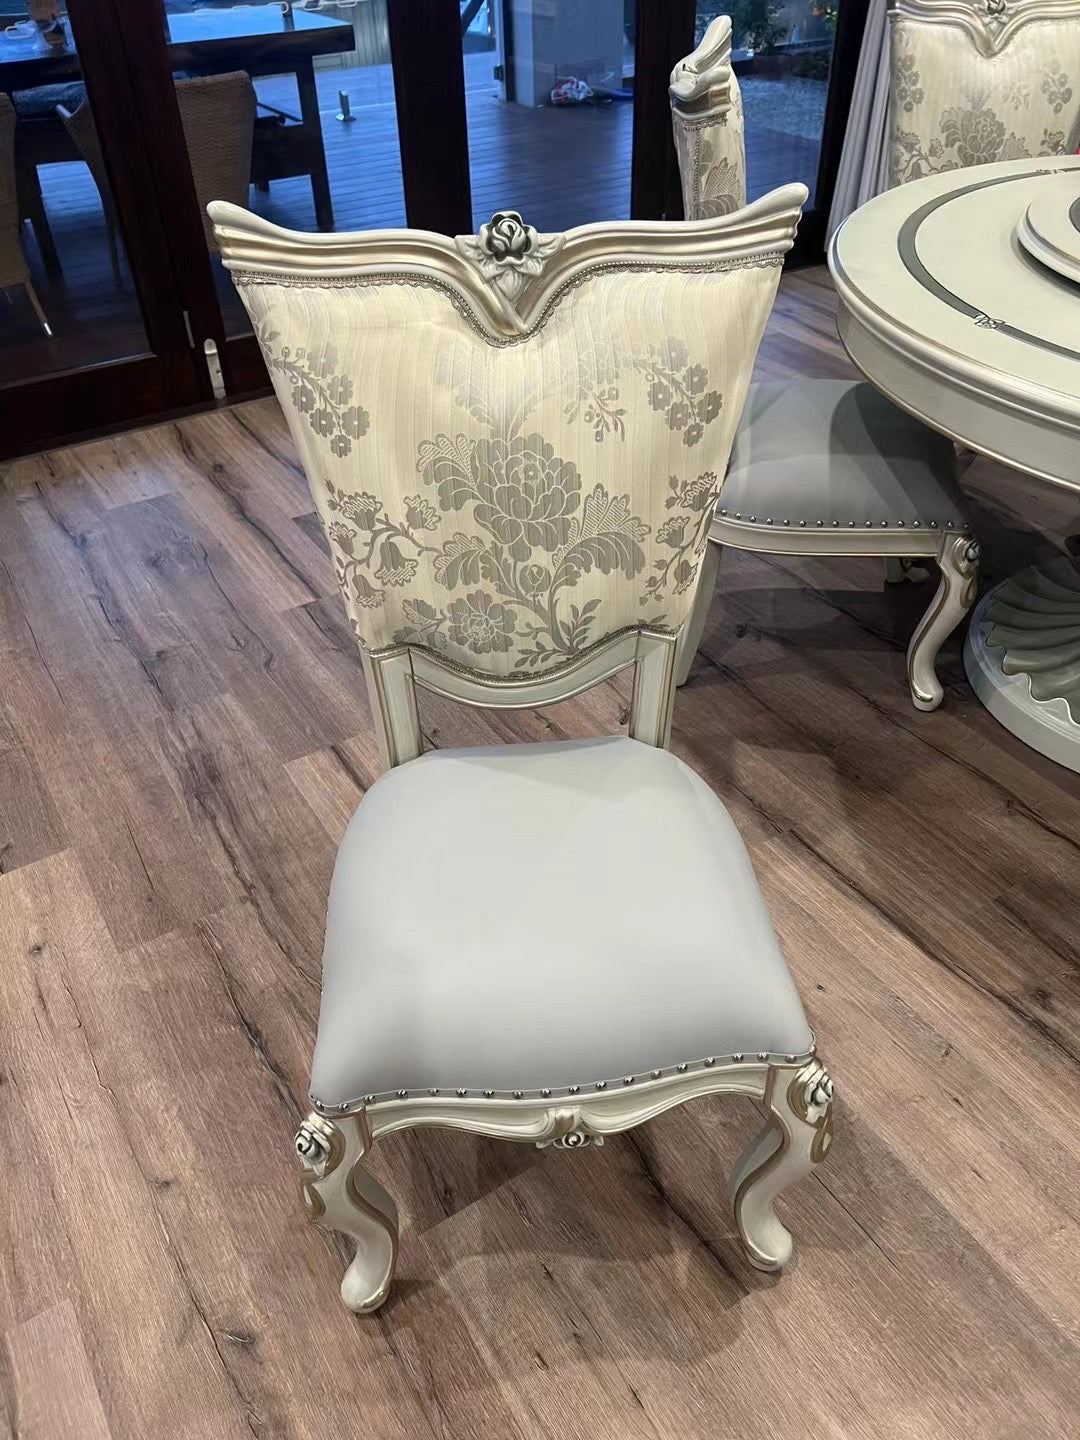 Valerie French Dining Chair